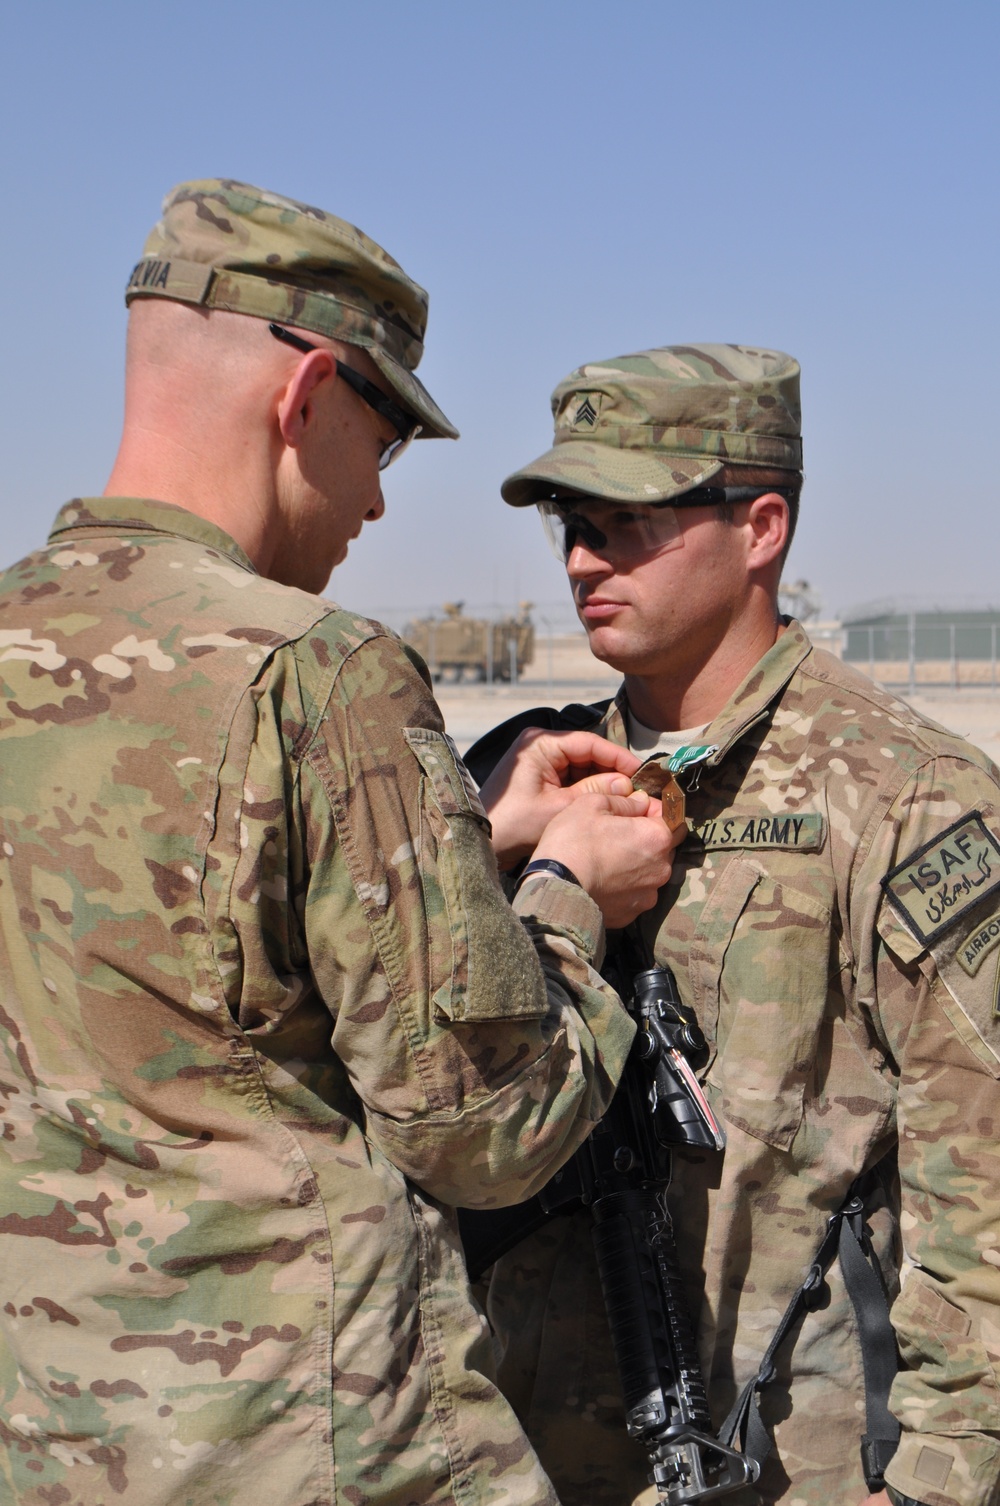 DVIDS - Images - Soldier honored for valor in Afghanistan [Image 1 of 2]